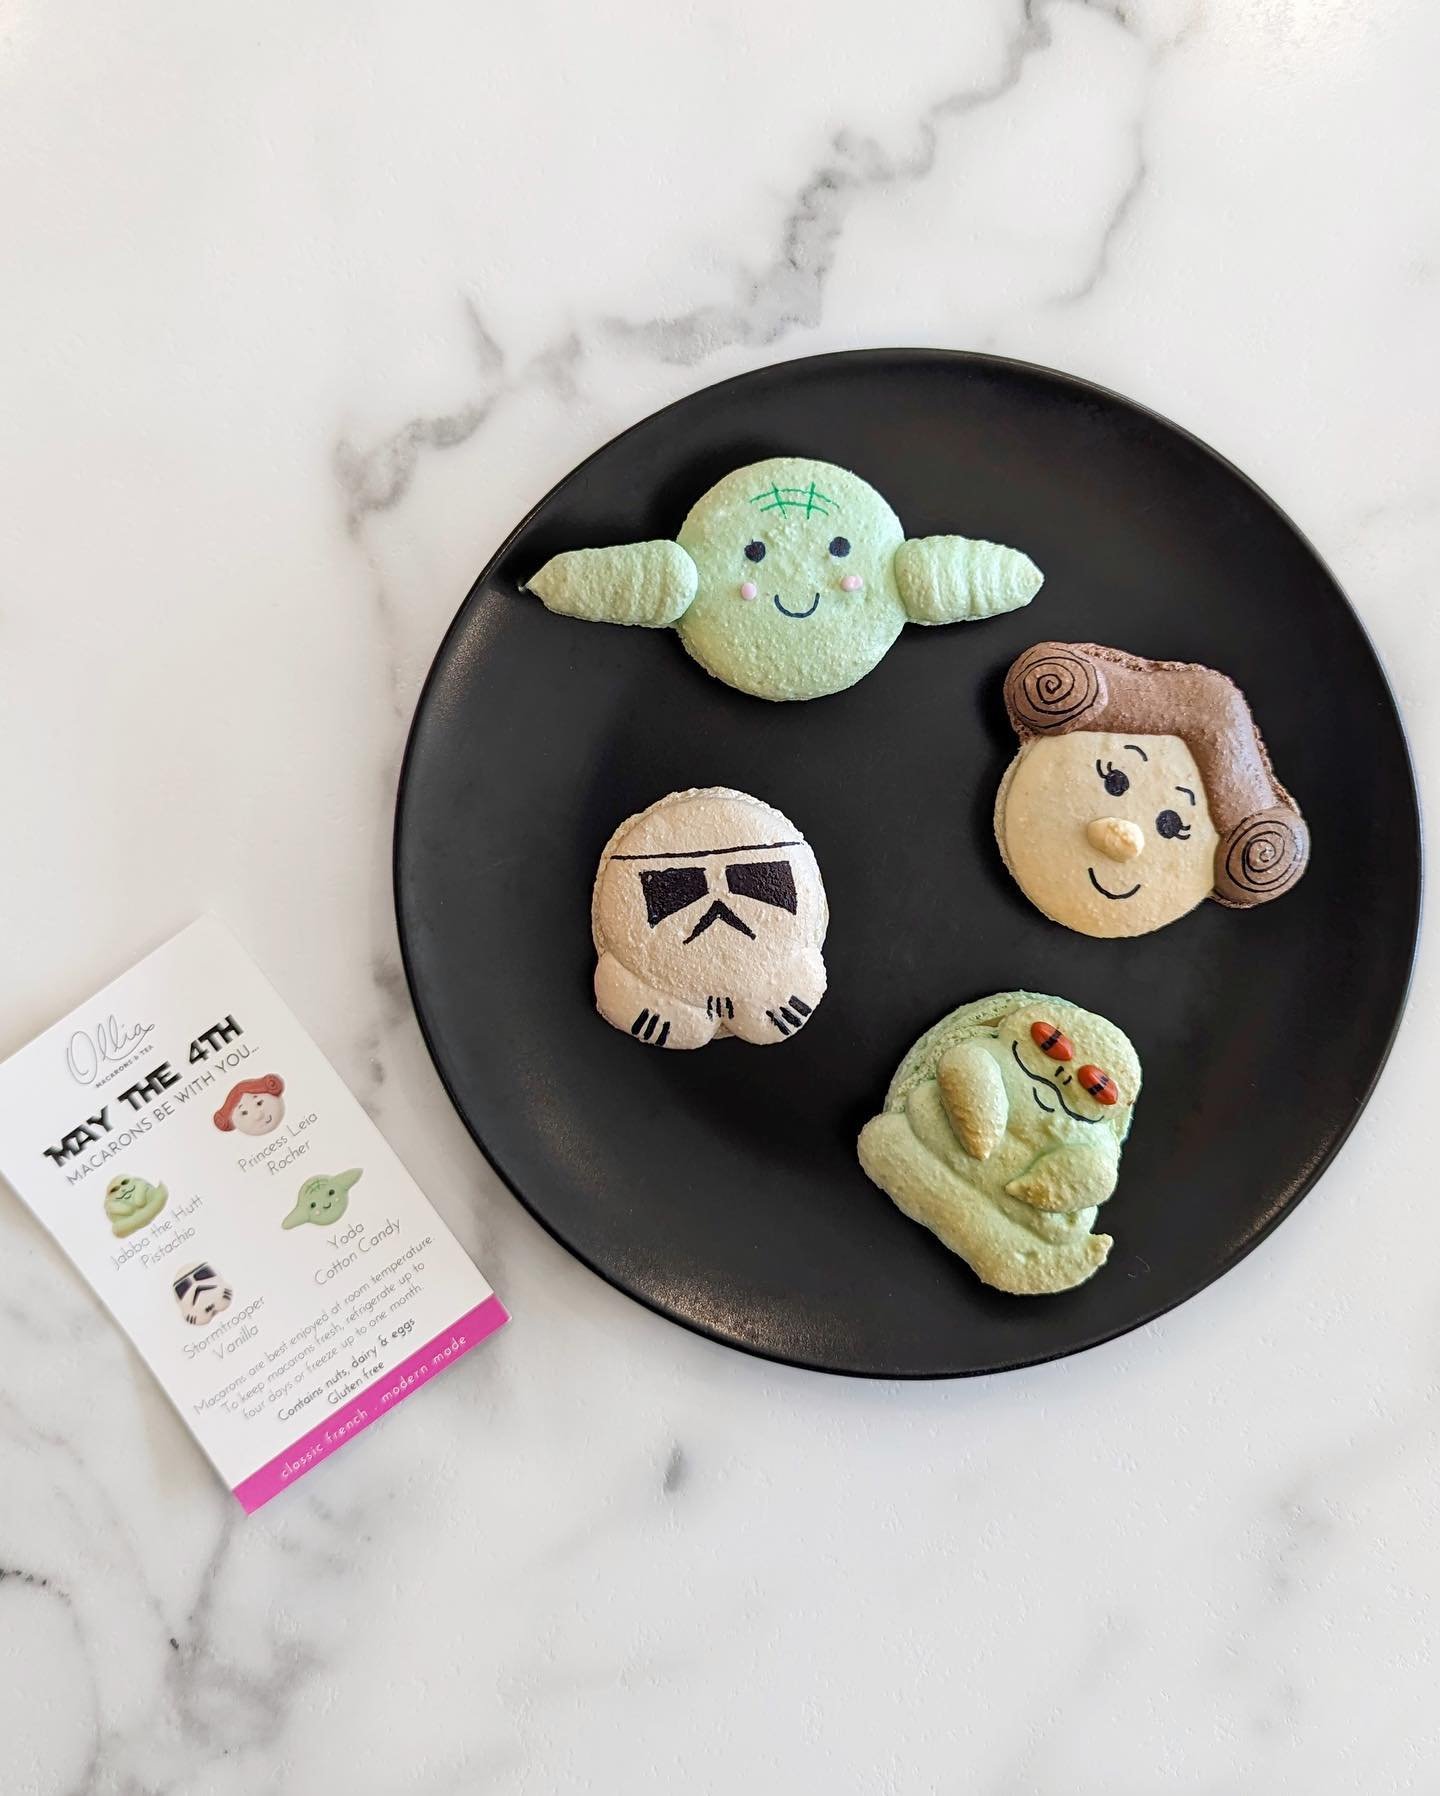 To celebrate @calgaryexpo happening in #YYC this weekend, we&rsquo;ve released our special edition May the 4th macarons early!

Feel the force and find Yoda (Cotton Candy), Jabba the Hutt (Pistachio), a Stormtrooper (Vanilla), and Princess Leia (Roch